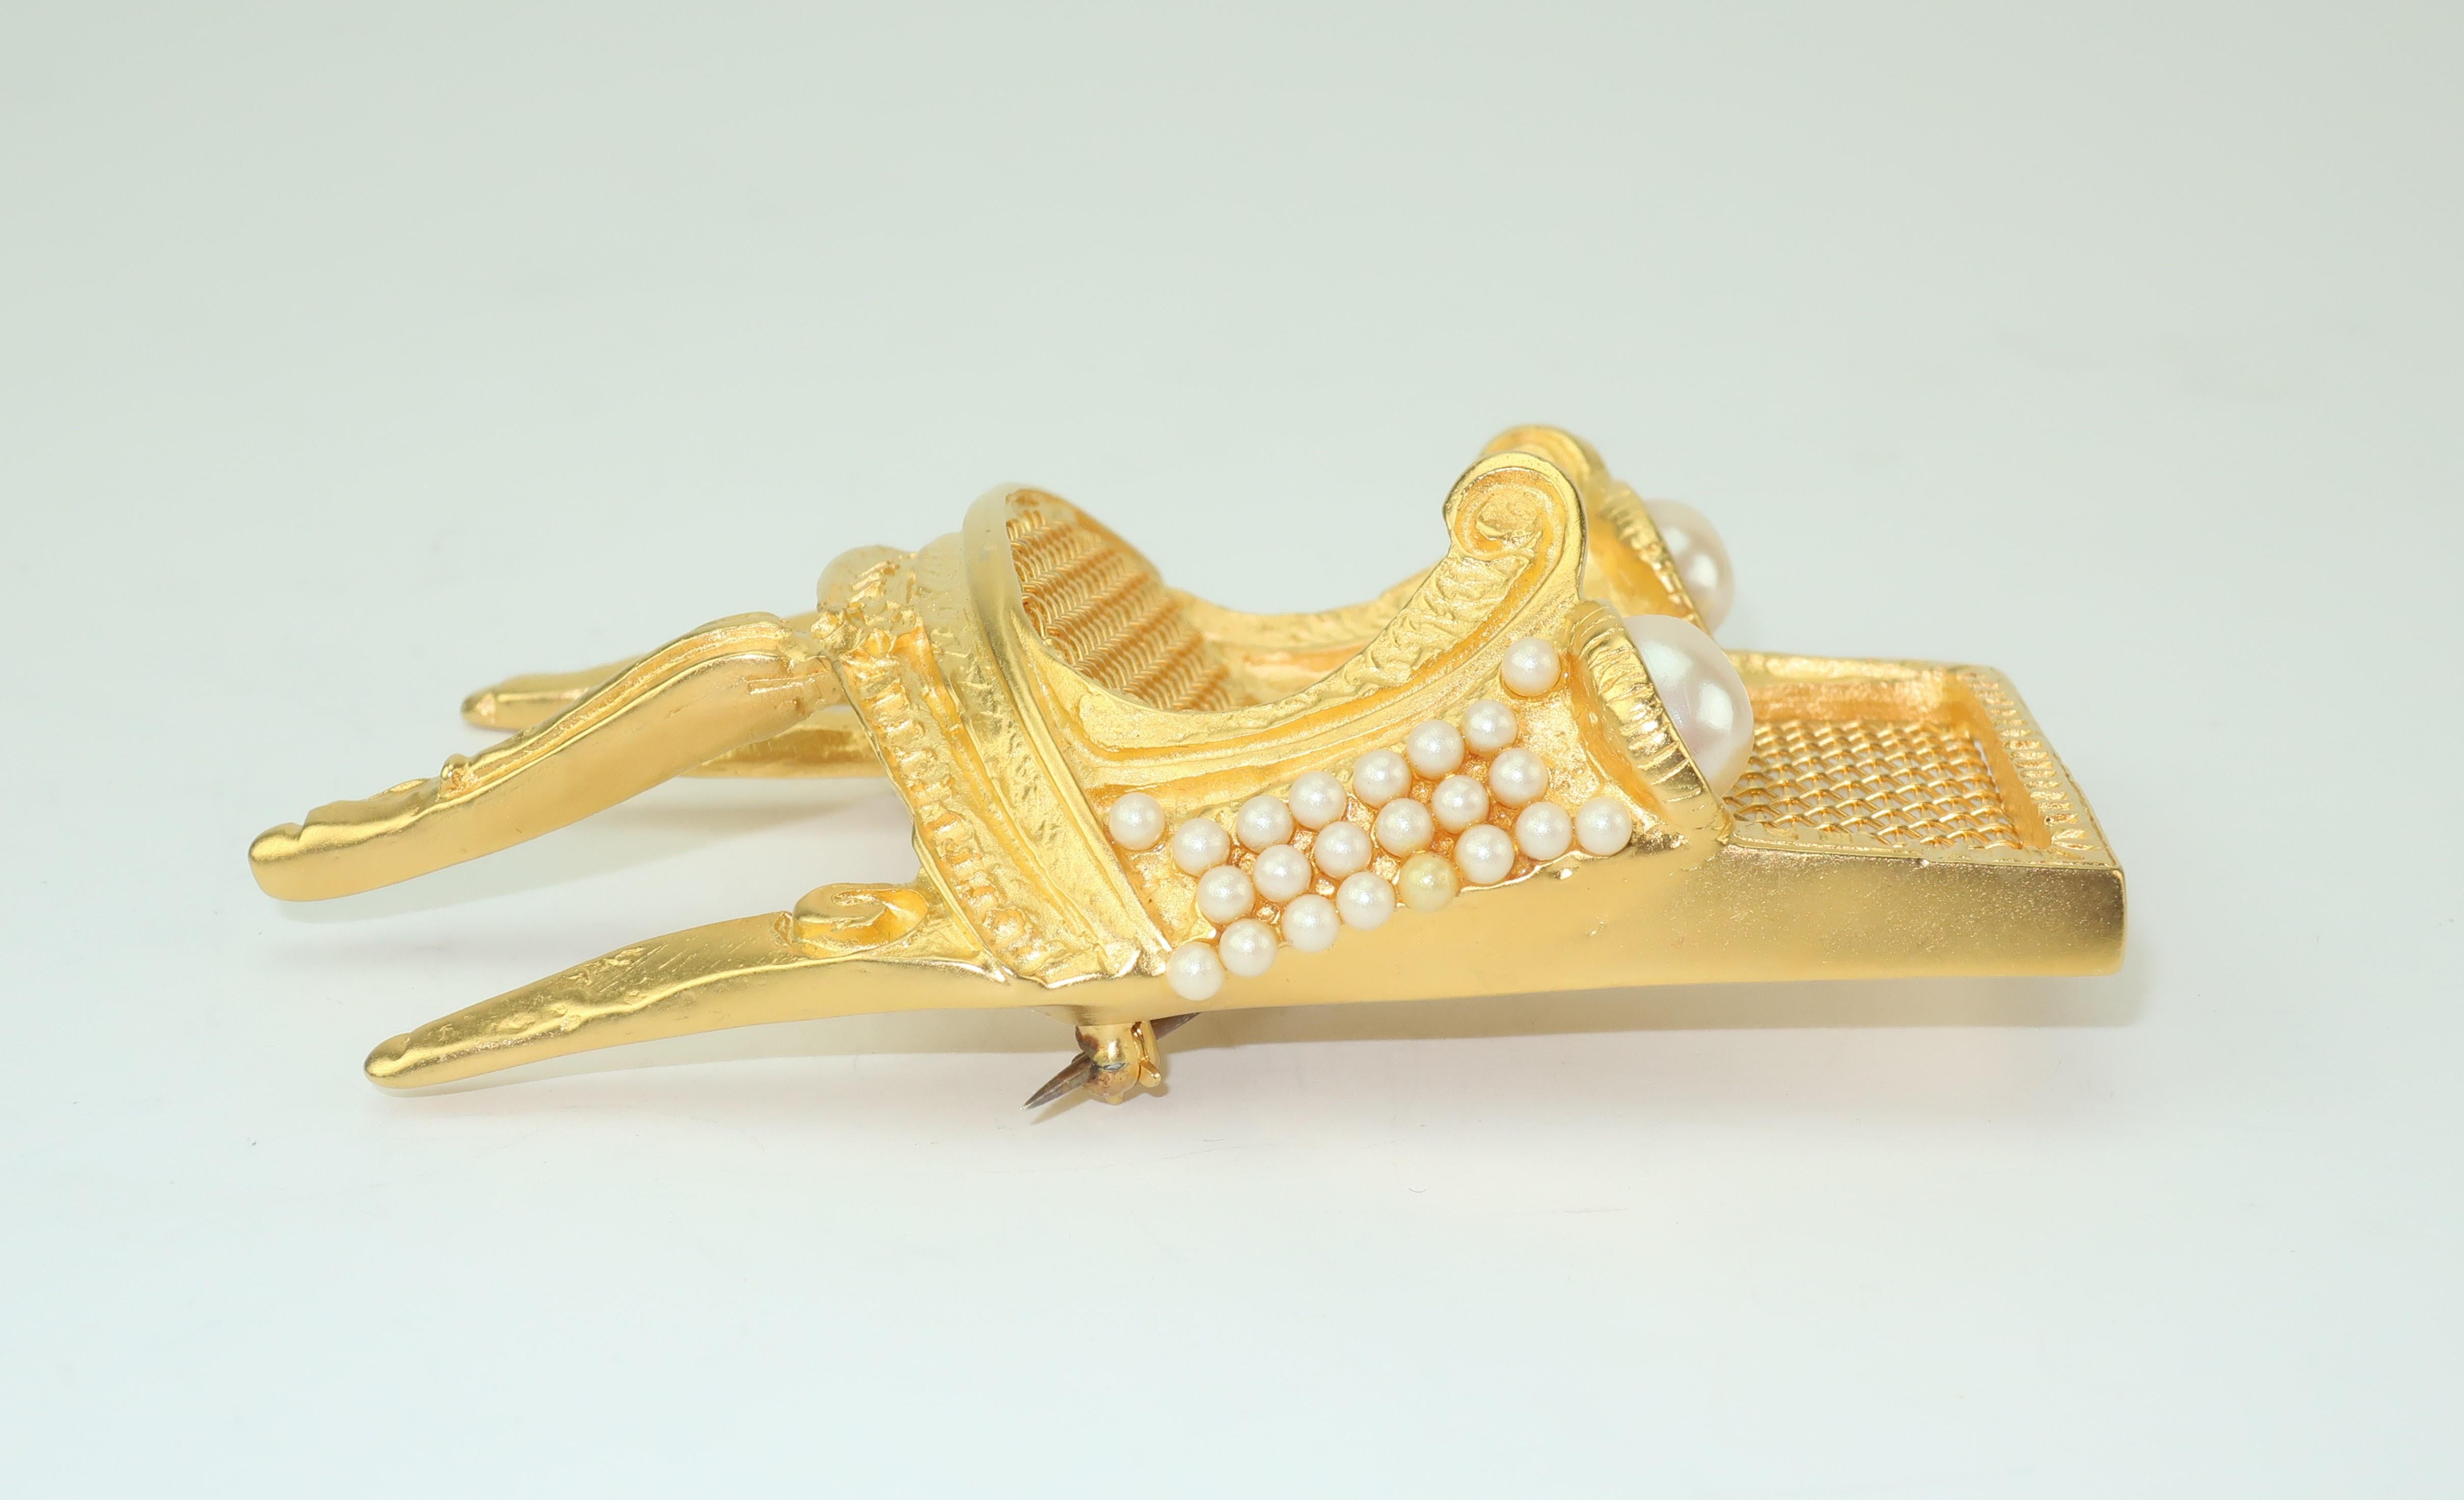 Large Karl Lagerfeld Gilt Gold 3-D Chair Brooch With Pearls 1